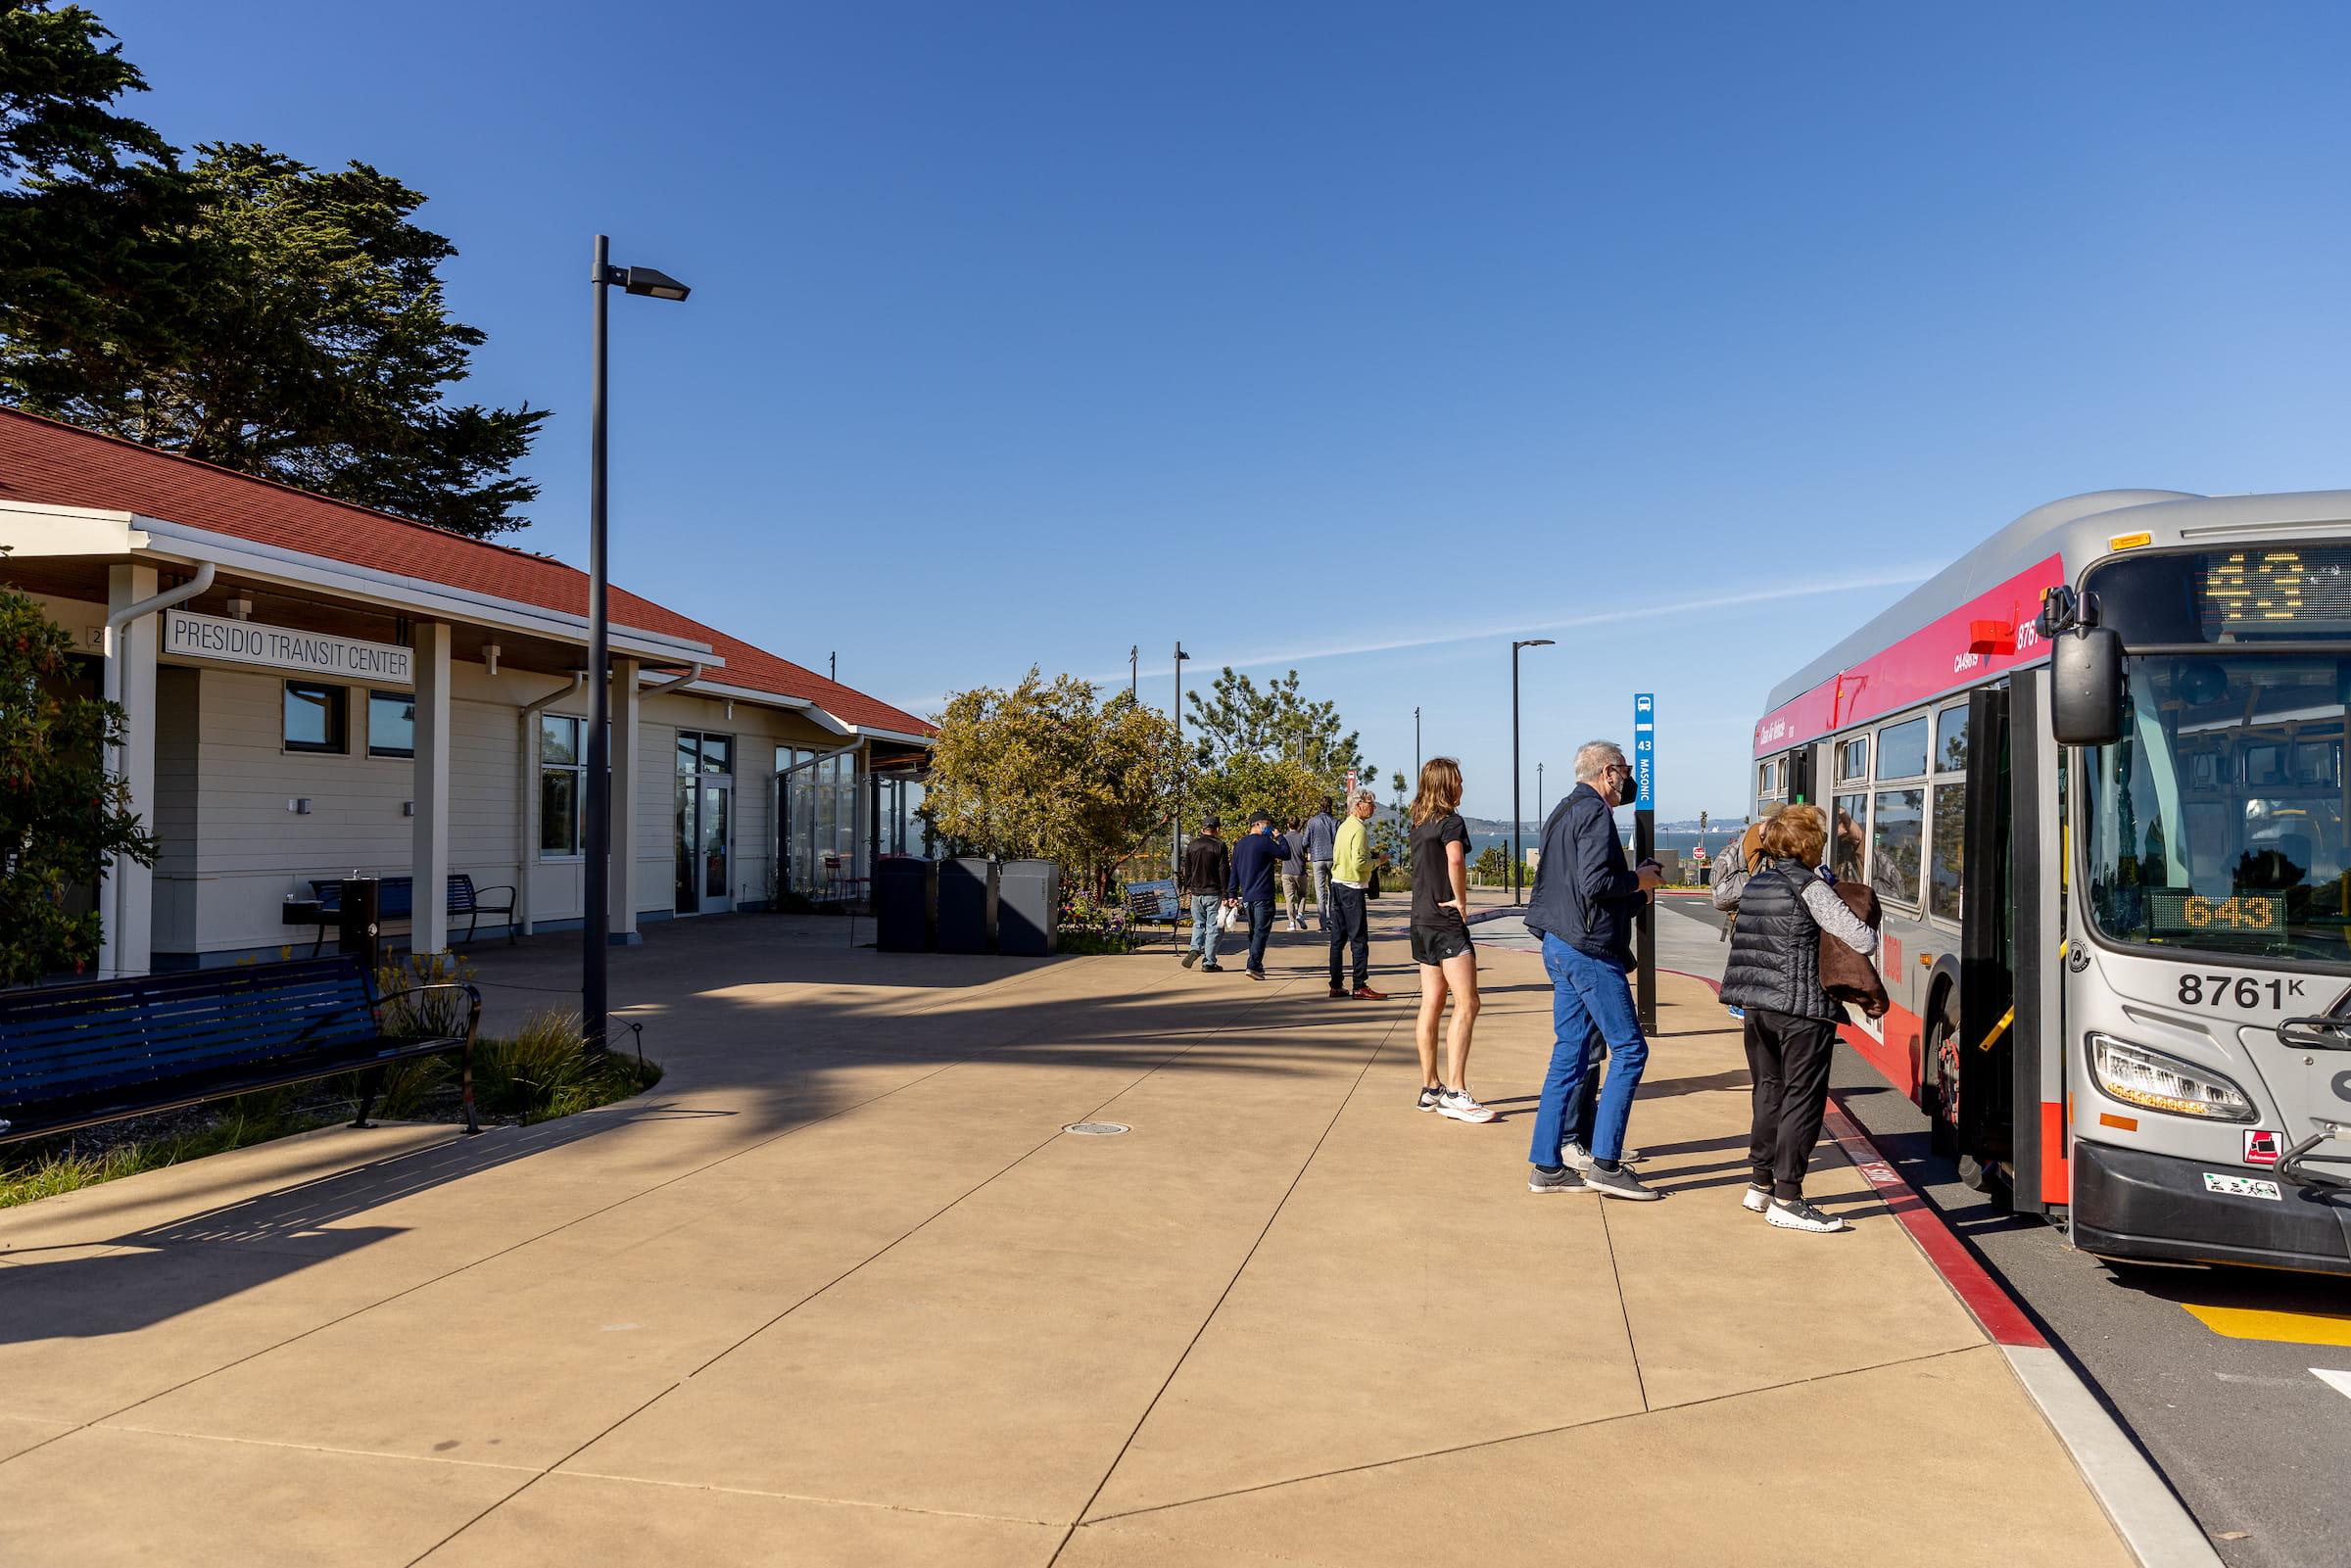 A Muni 43 bus waits for passengers to board in front of Presidio Transit Center. Photo by Myleen Hollero.